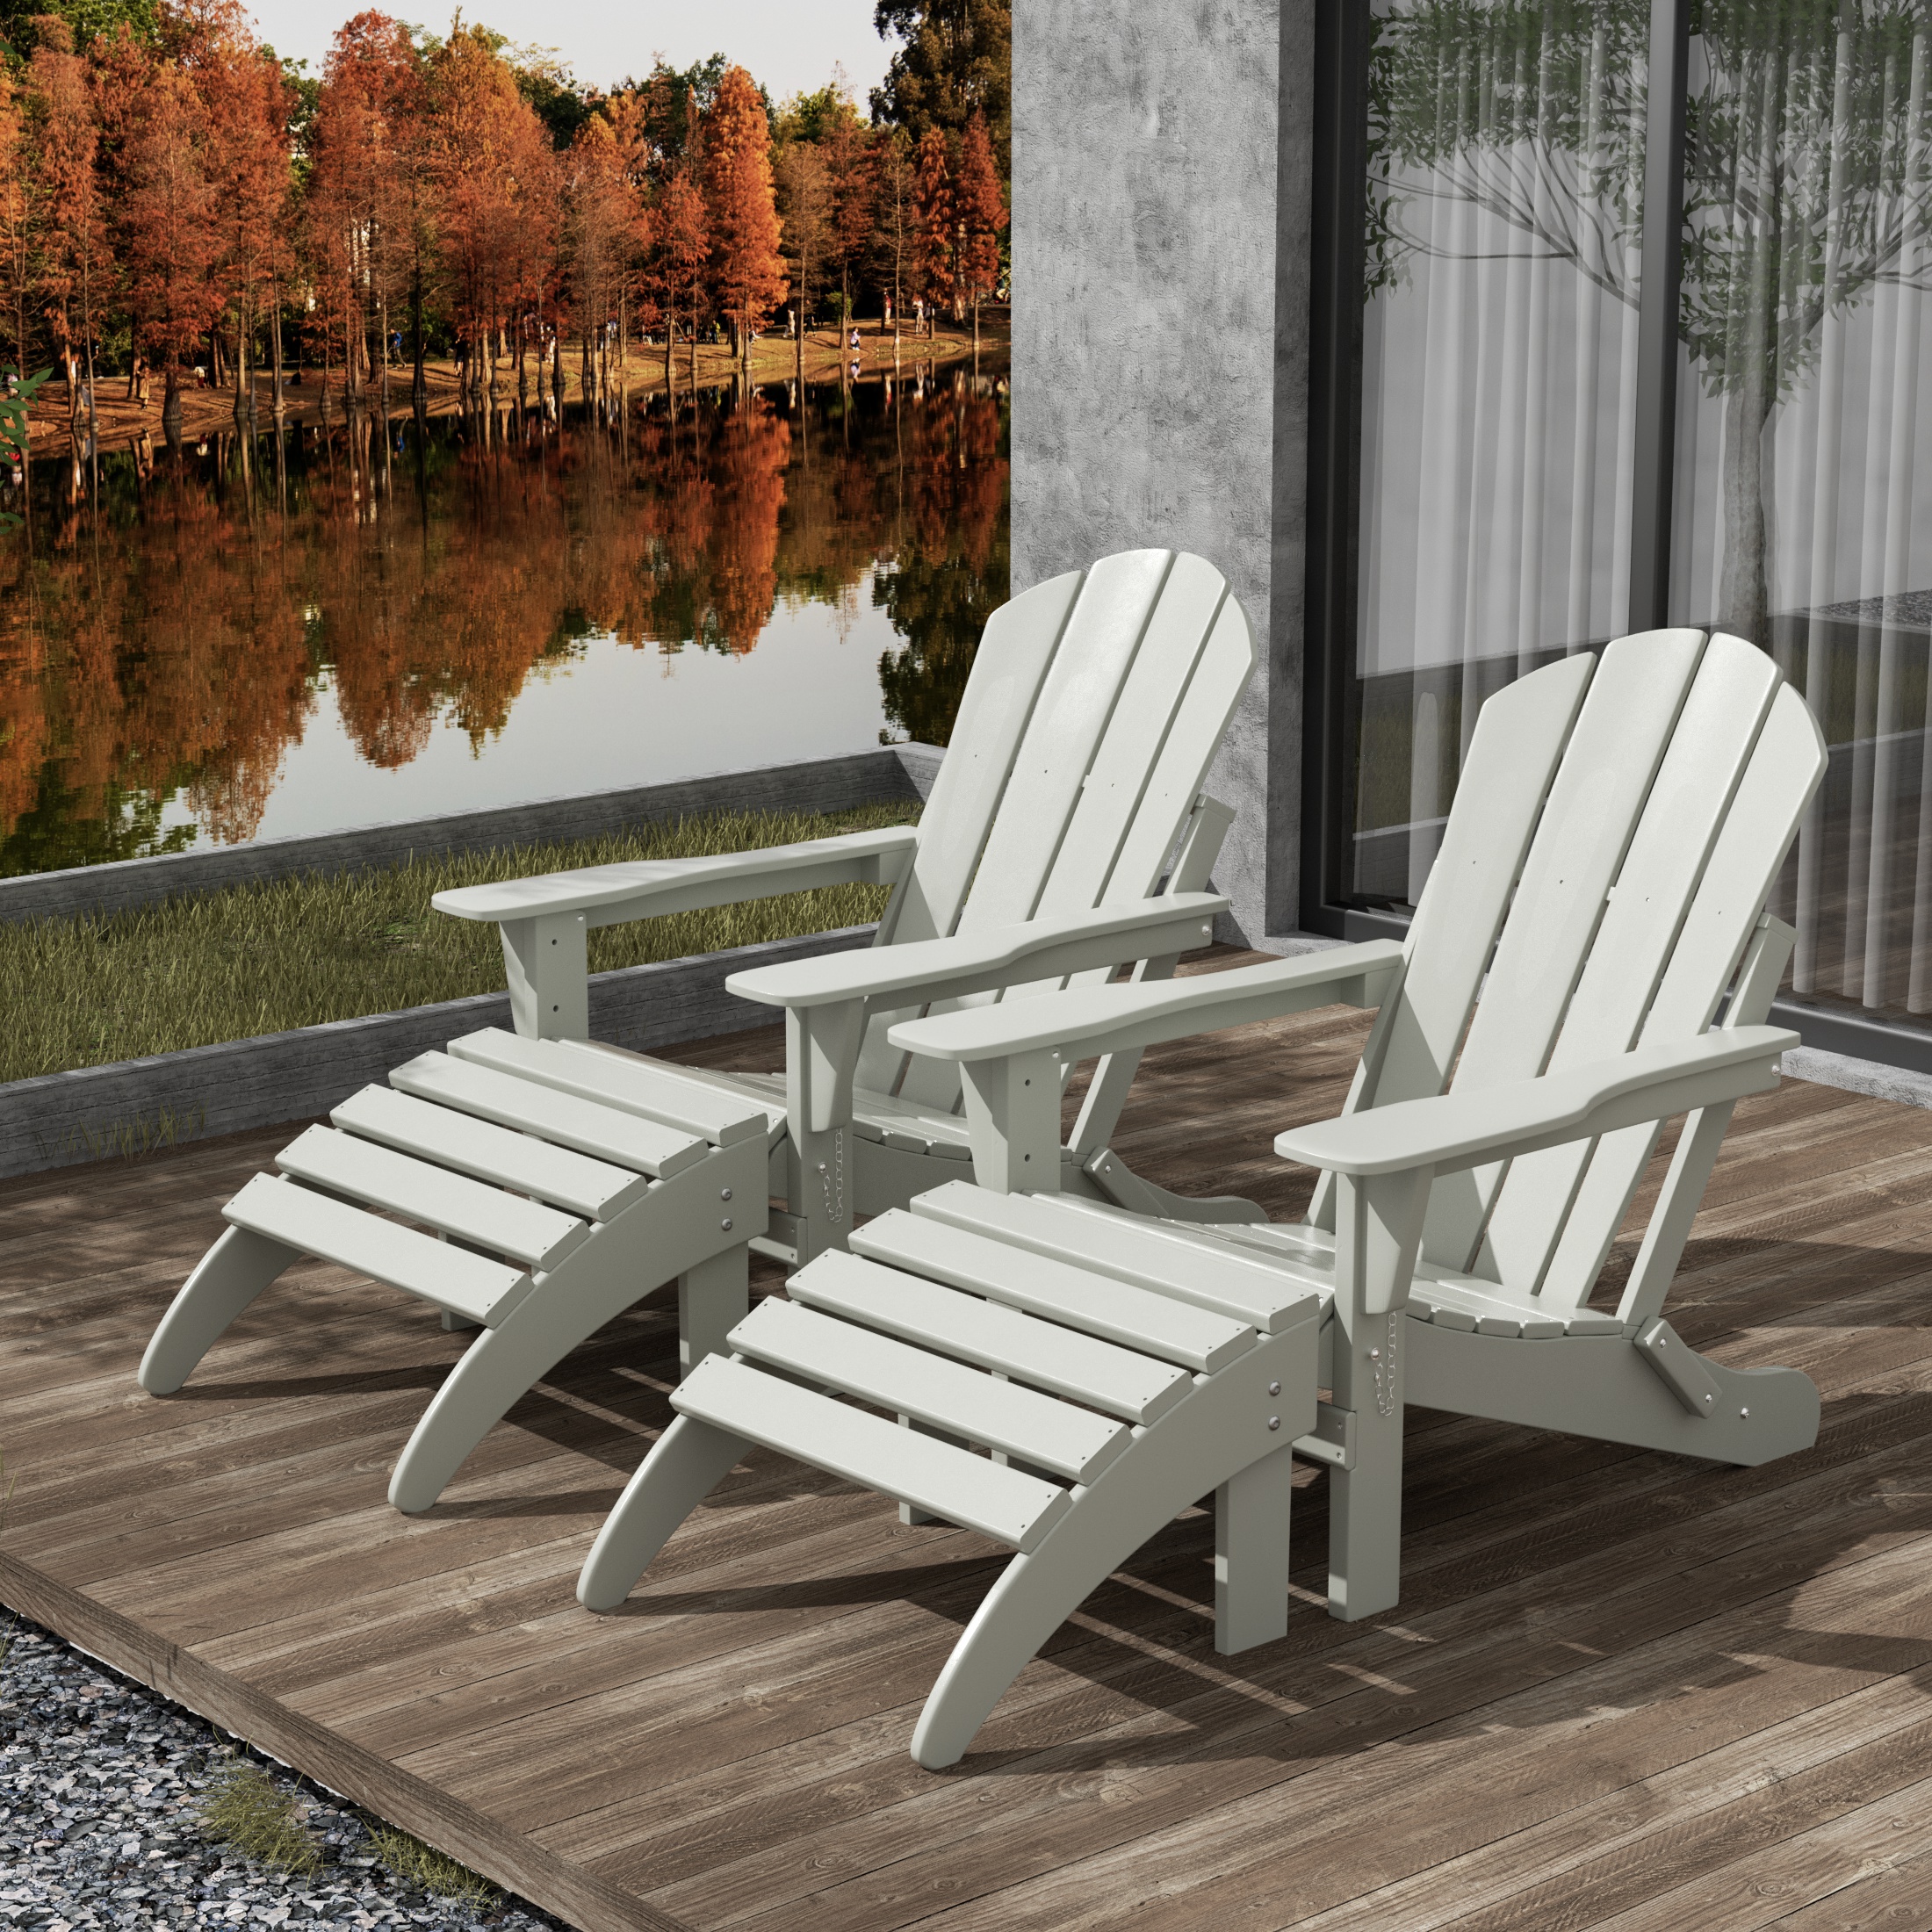 WestinTrends Malibu Outdoor Lounge Chair Set, 4-Pieces Adirondack Chair Set of 2 with Ottoman, All Weather Poly Lumber Patio Lawn Folding Chair for Outside Pool Beach, Sand - image 5 of 5